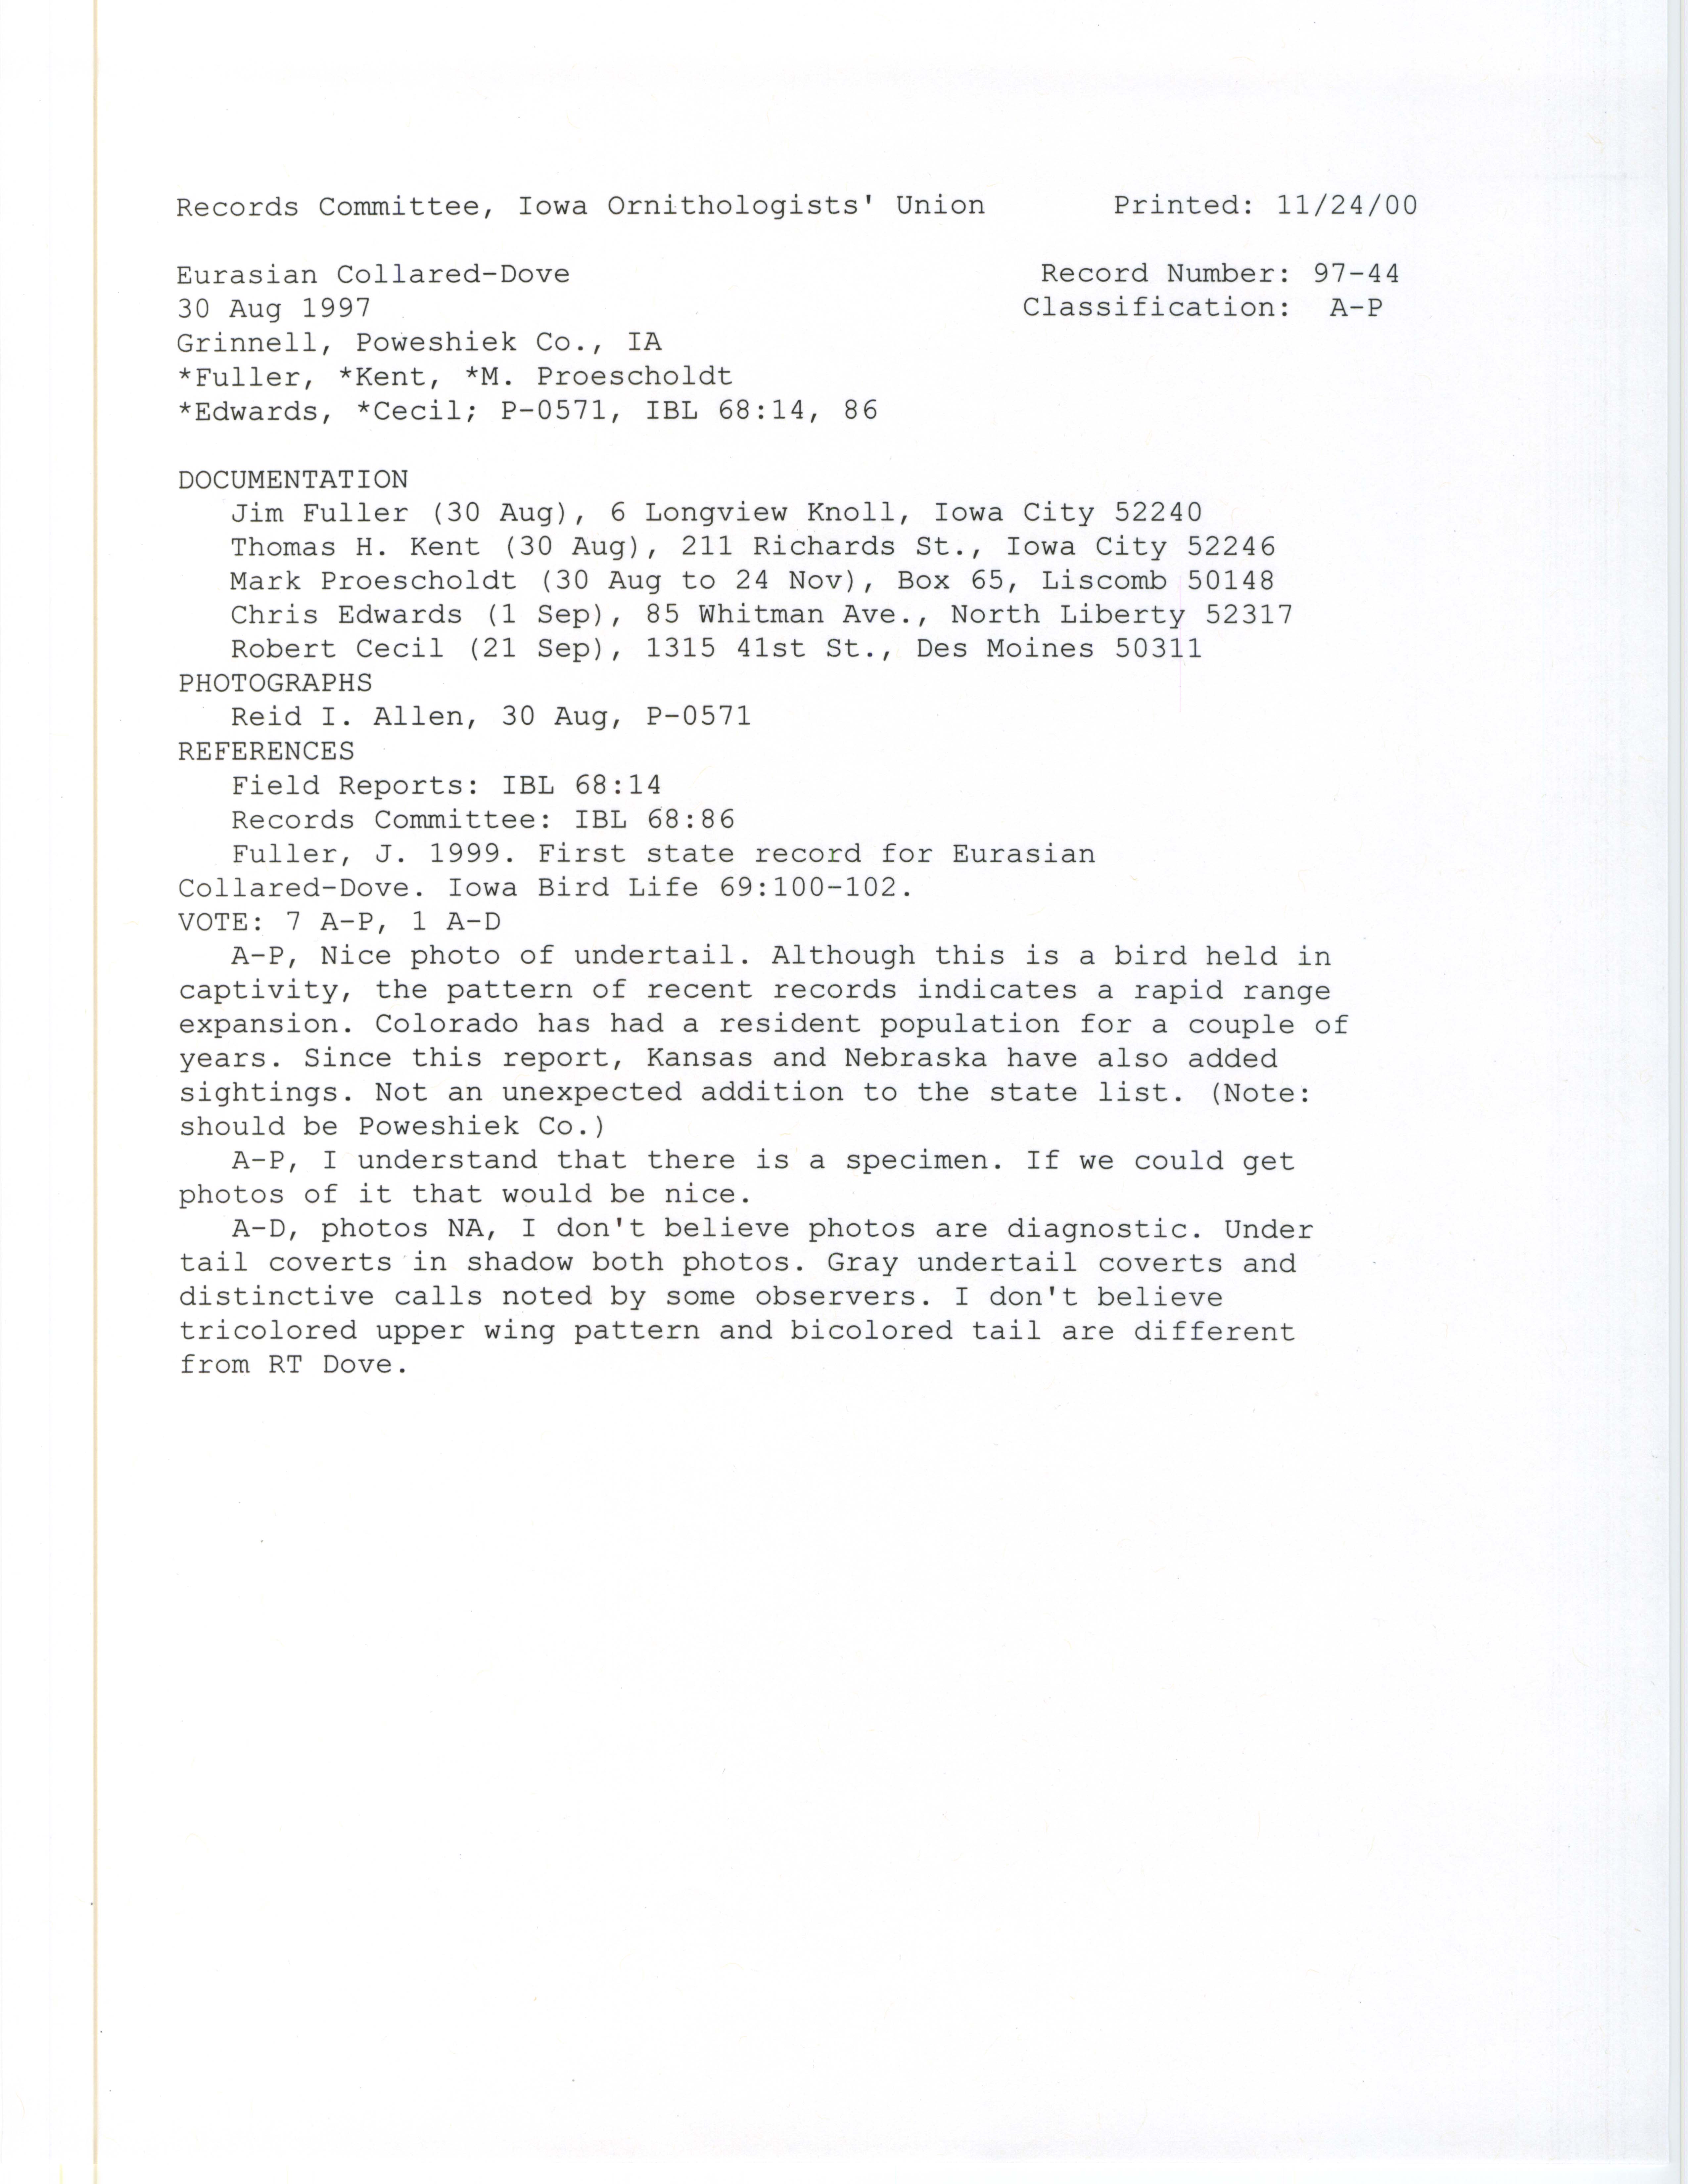 Records Committee review for rare bird sighting for Eurasian Collared Dove at Grinnell Country Club, 1997